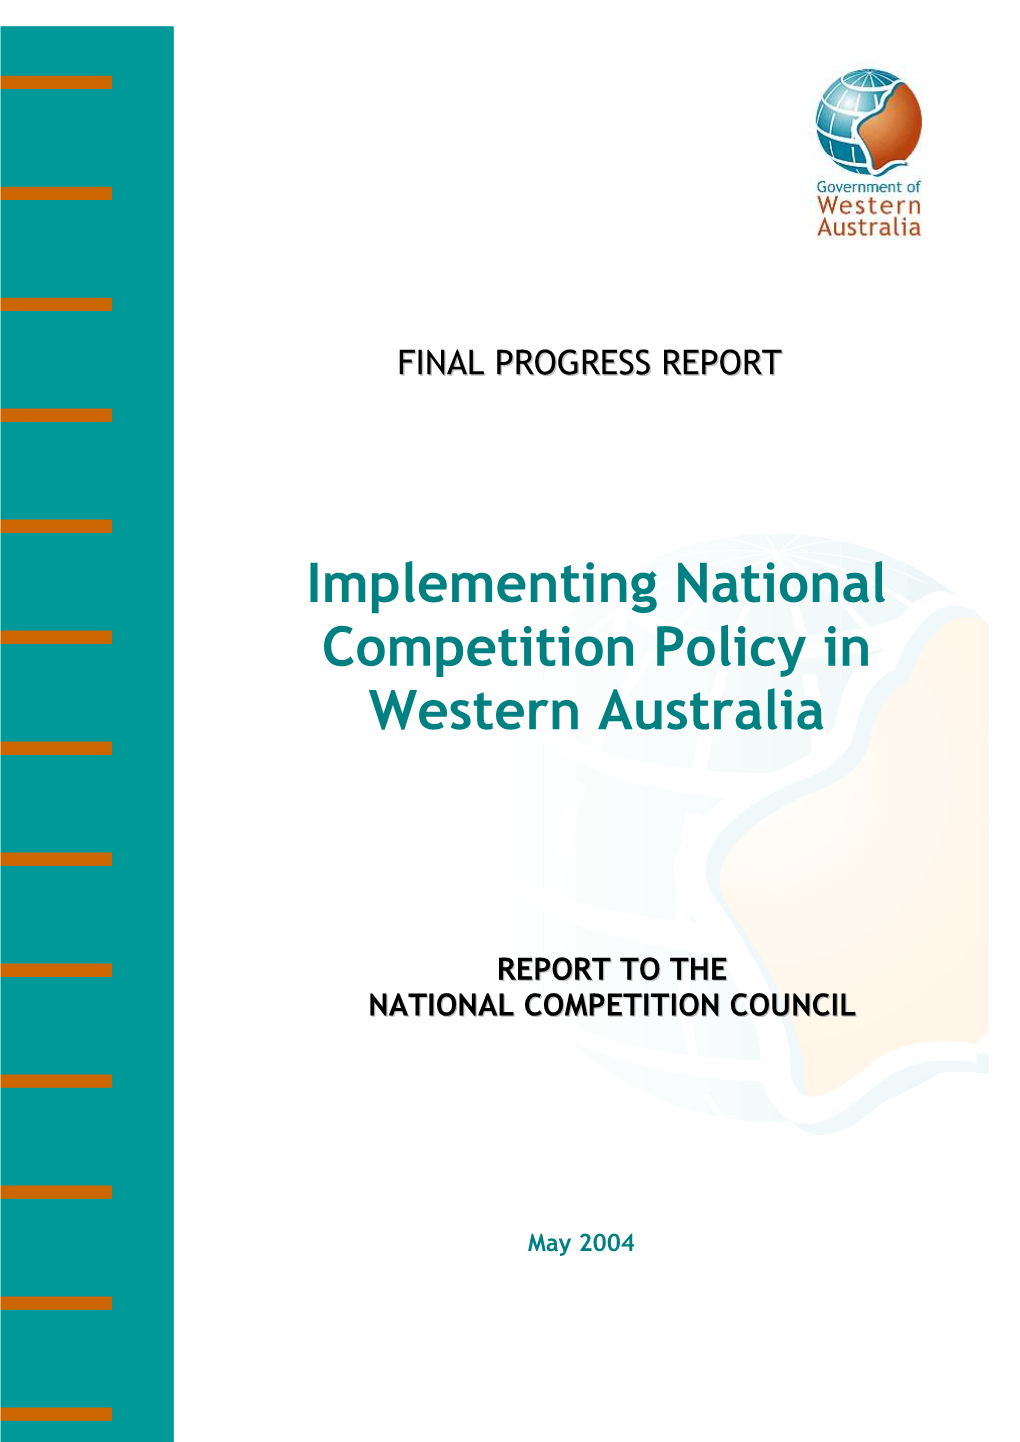 PROGRESS REPORT on Implementing NCP in Western